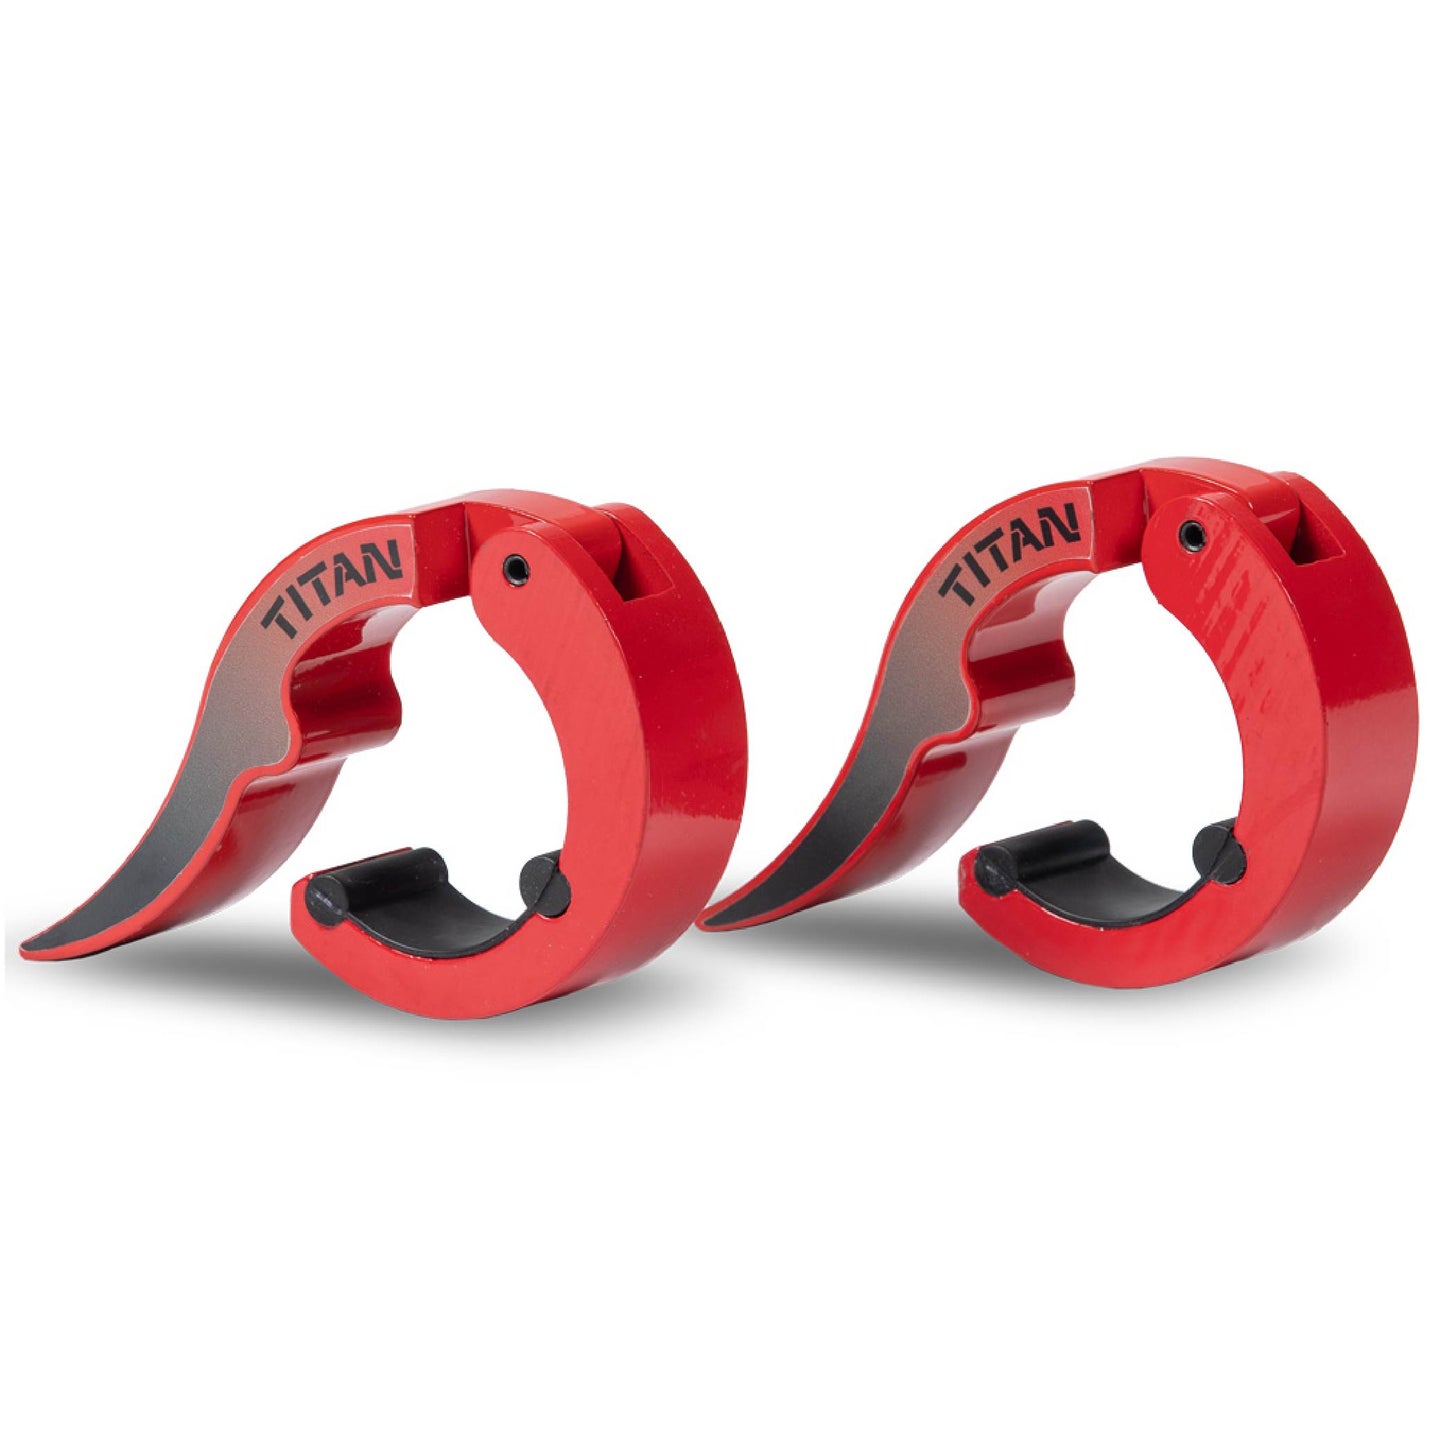 Quick Release Weight Clamp Collars - view 1